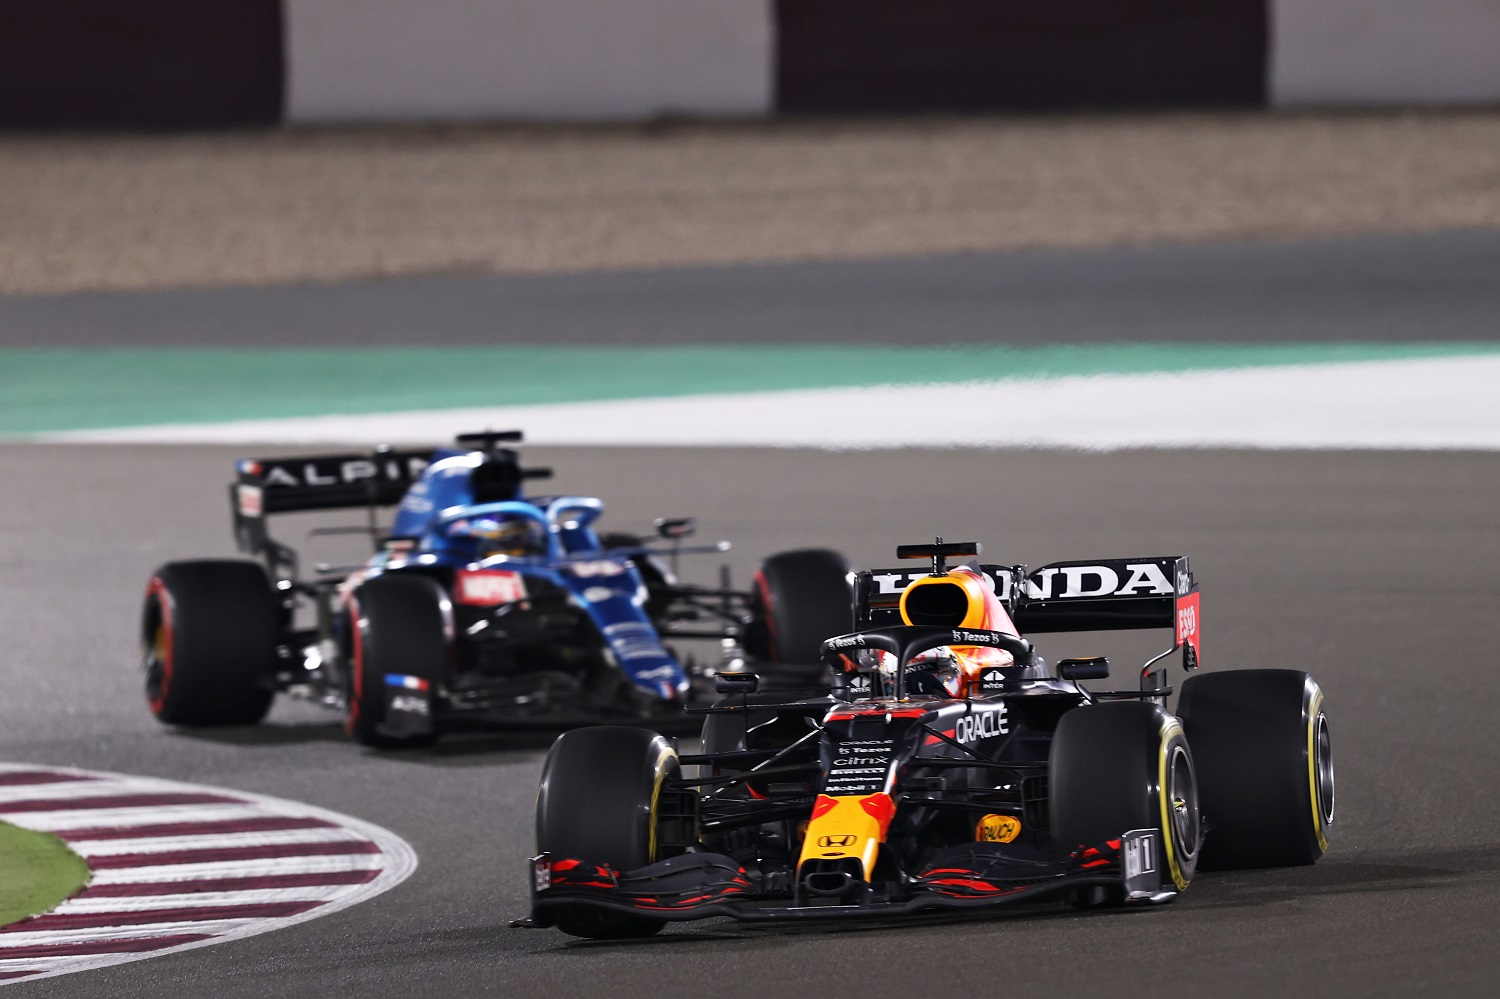 Max Verstappen, driving the Red Bull Racing RB16B Honda, leads Fernando Alonso, driving the Alpine A521 Renault, during the Formula 1 Grand Prix of Qatar on Nov. 21, 2021.